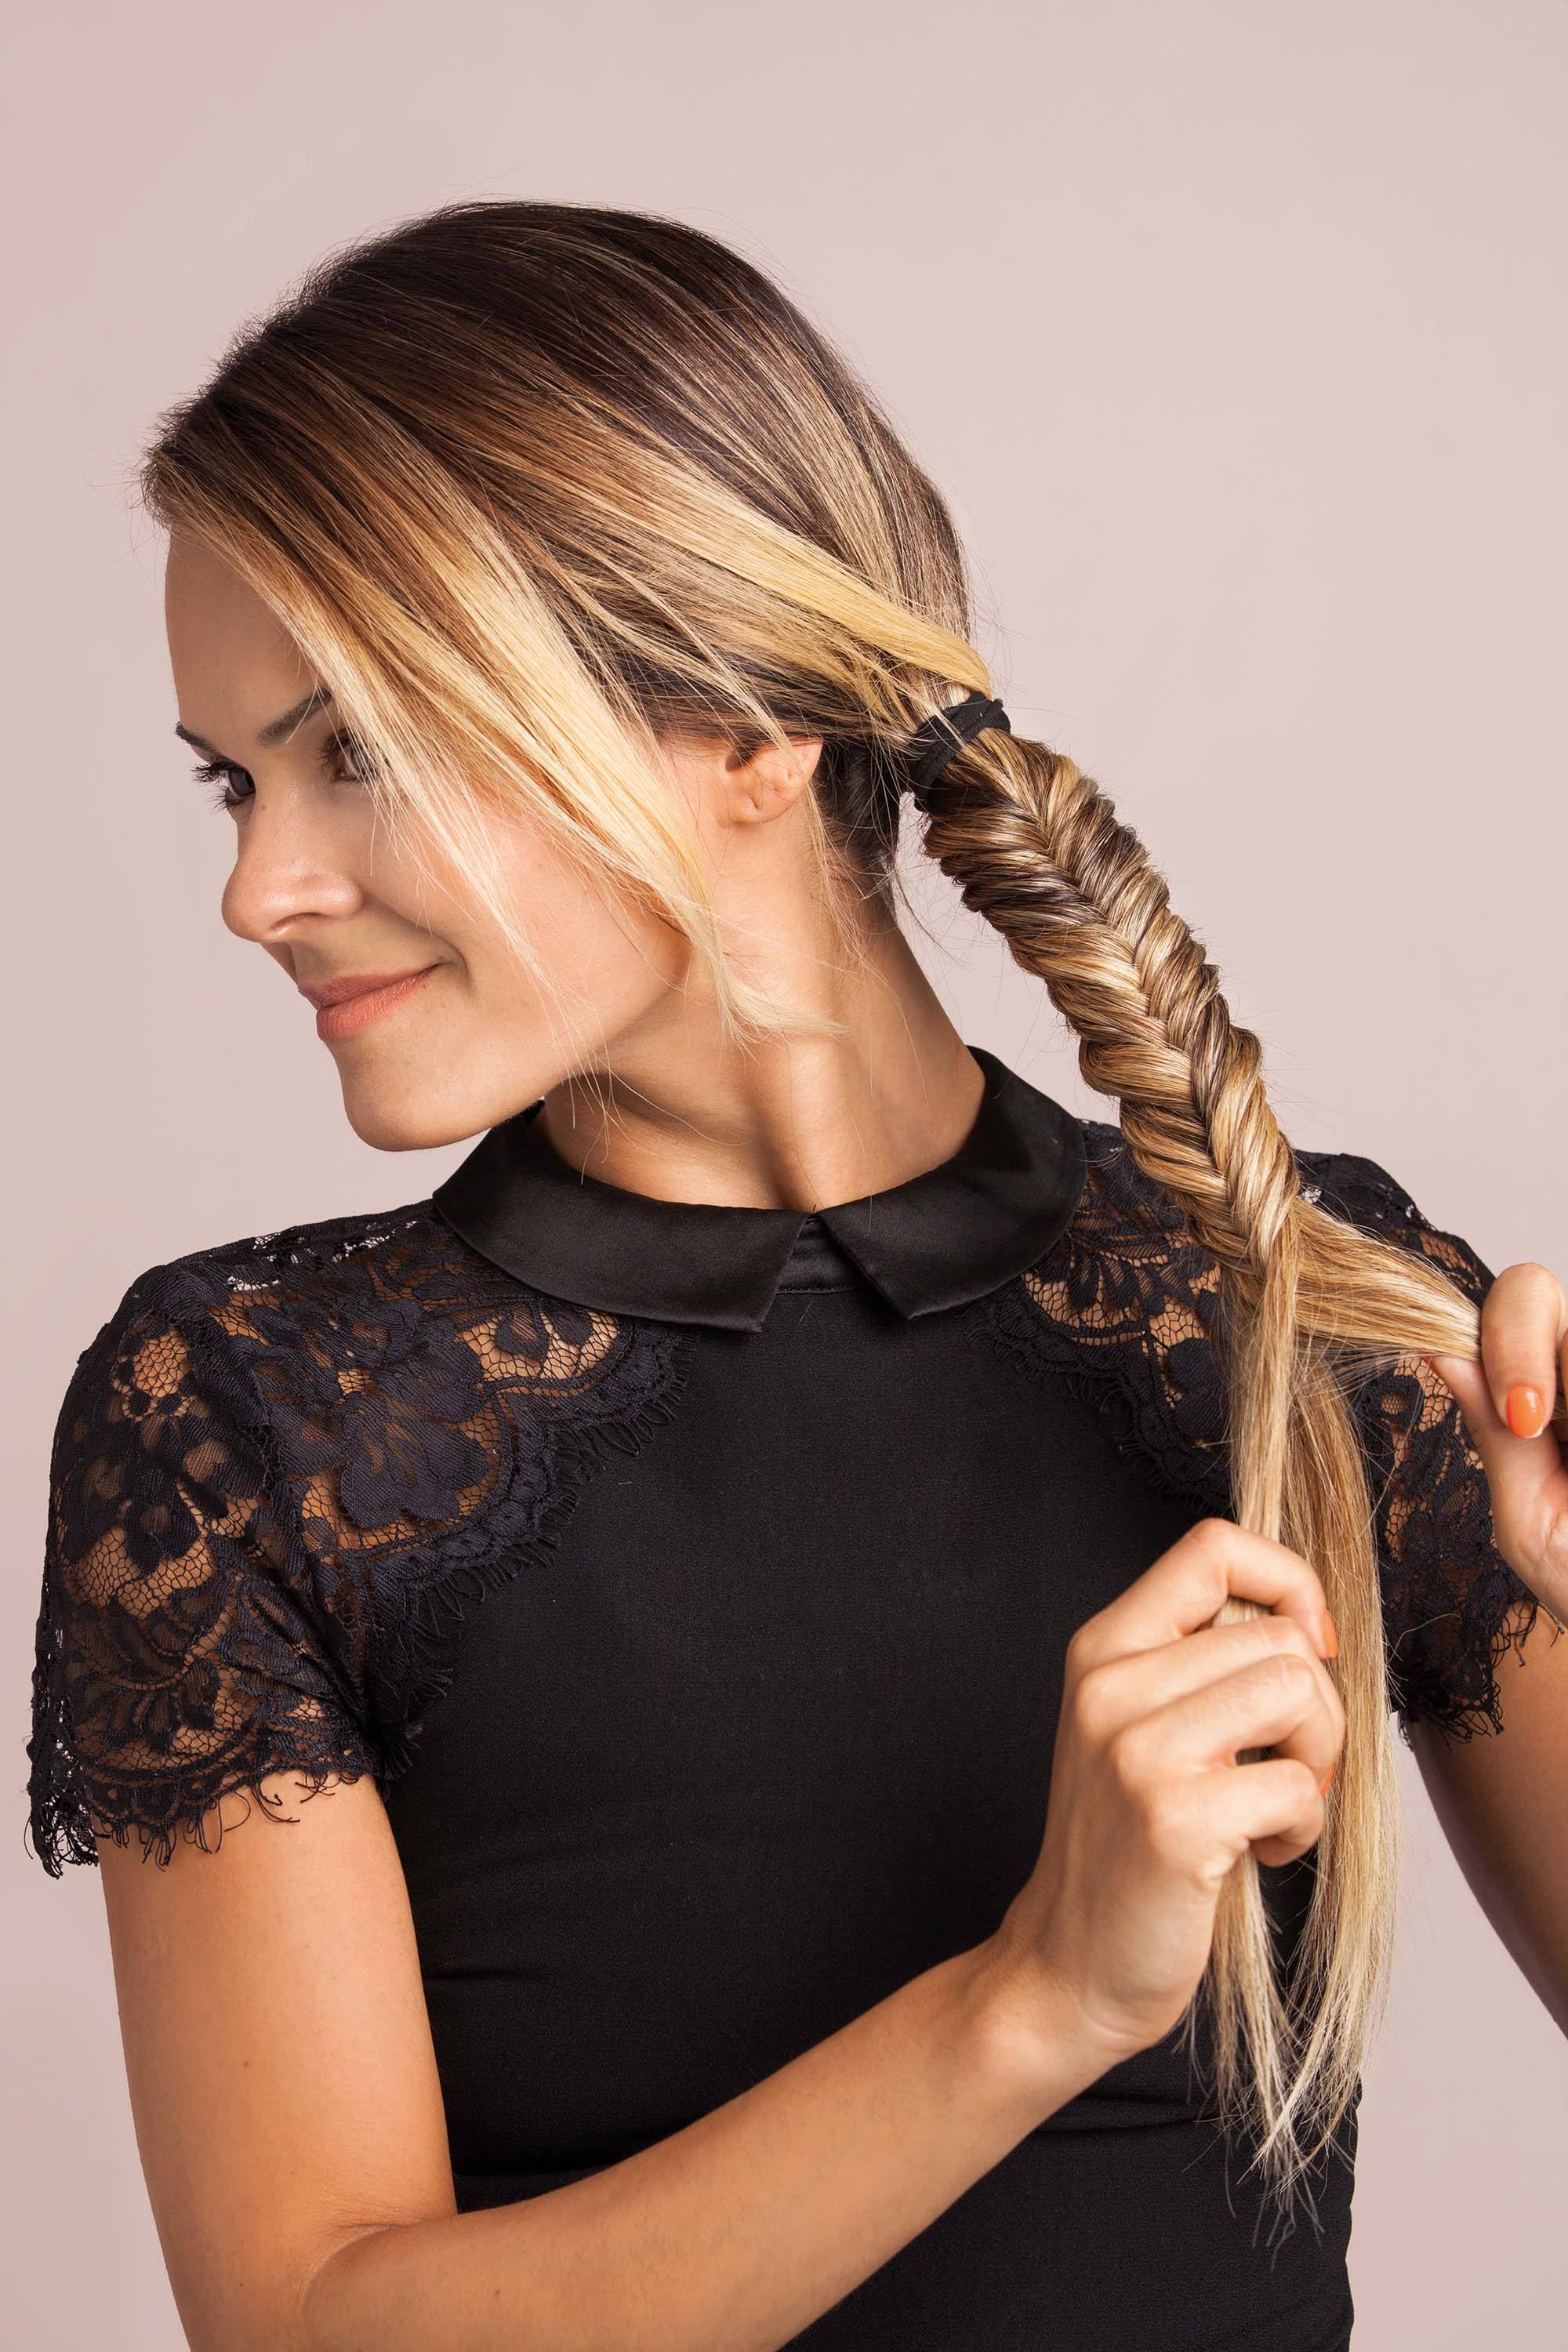 How To Do A Side Fishtail Braid